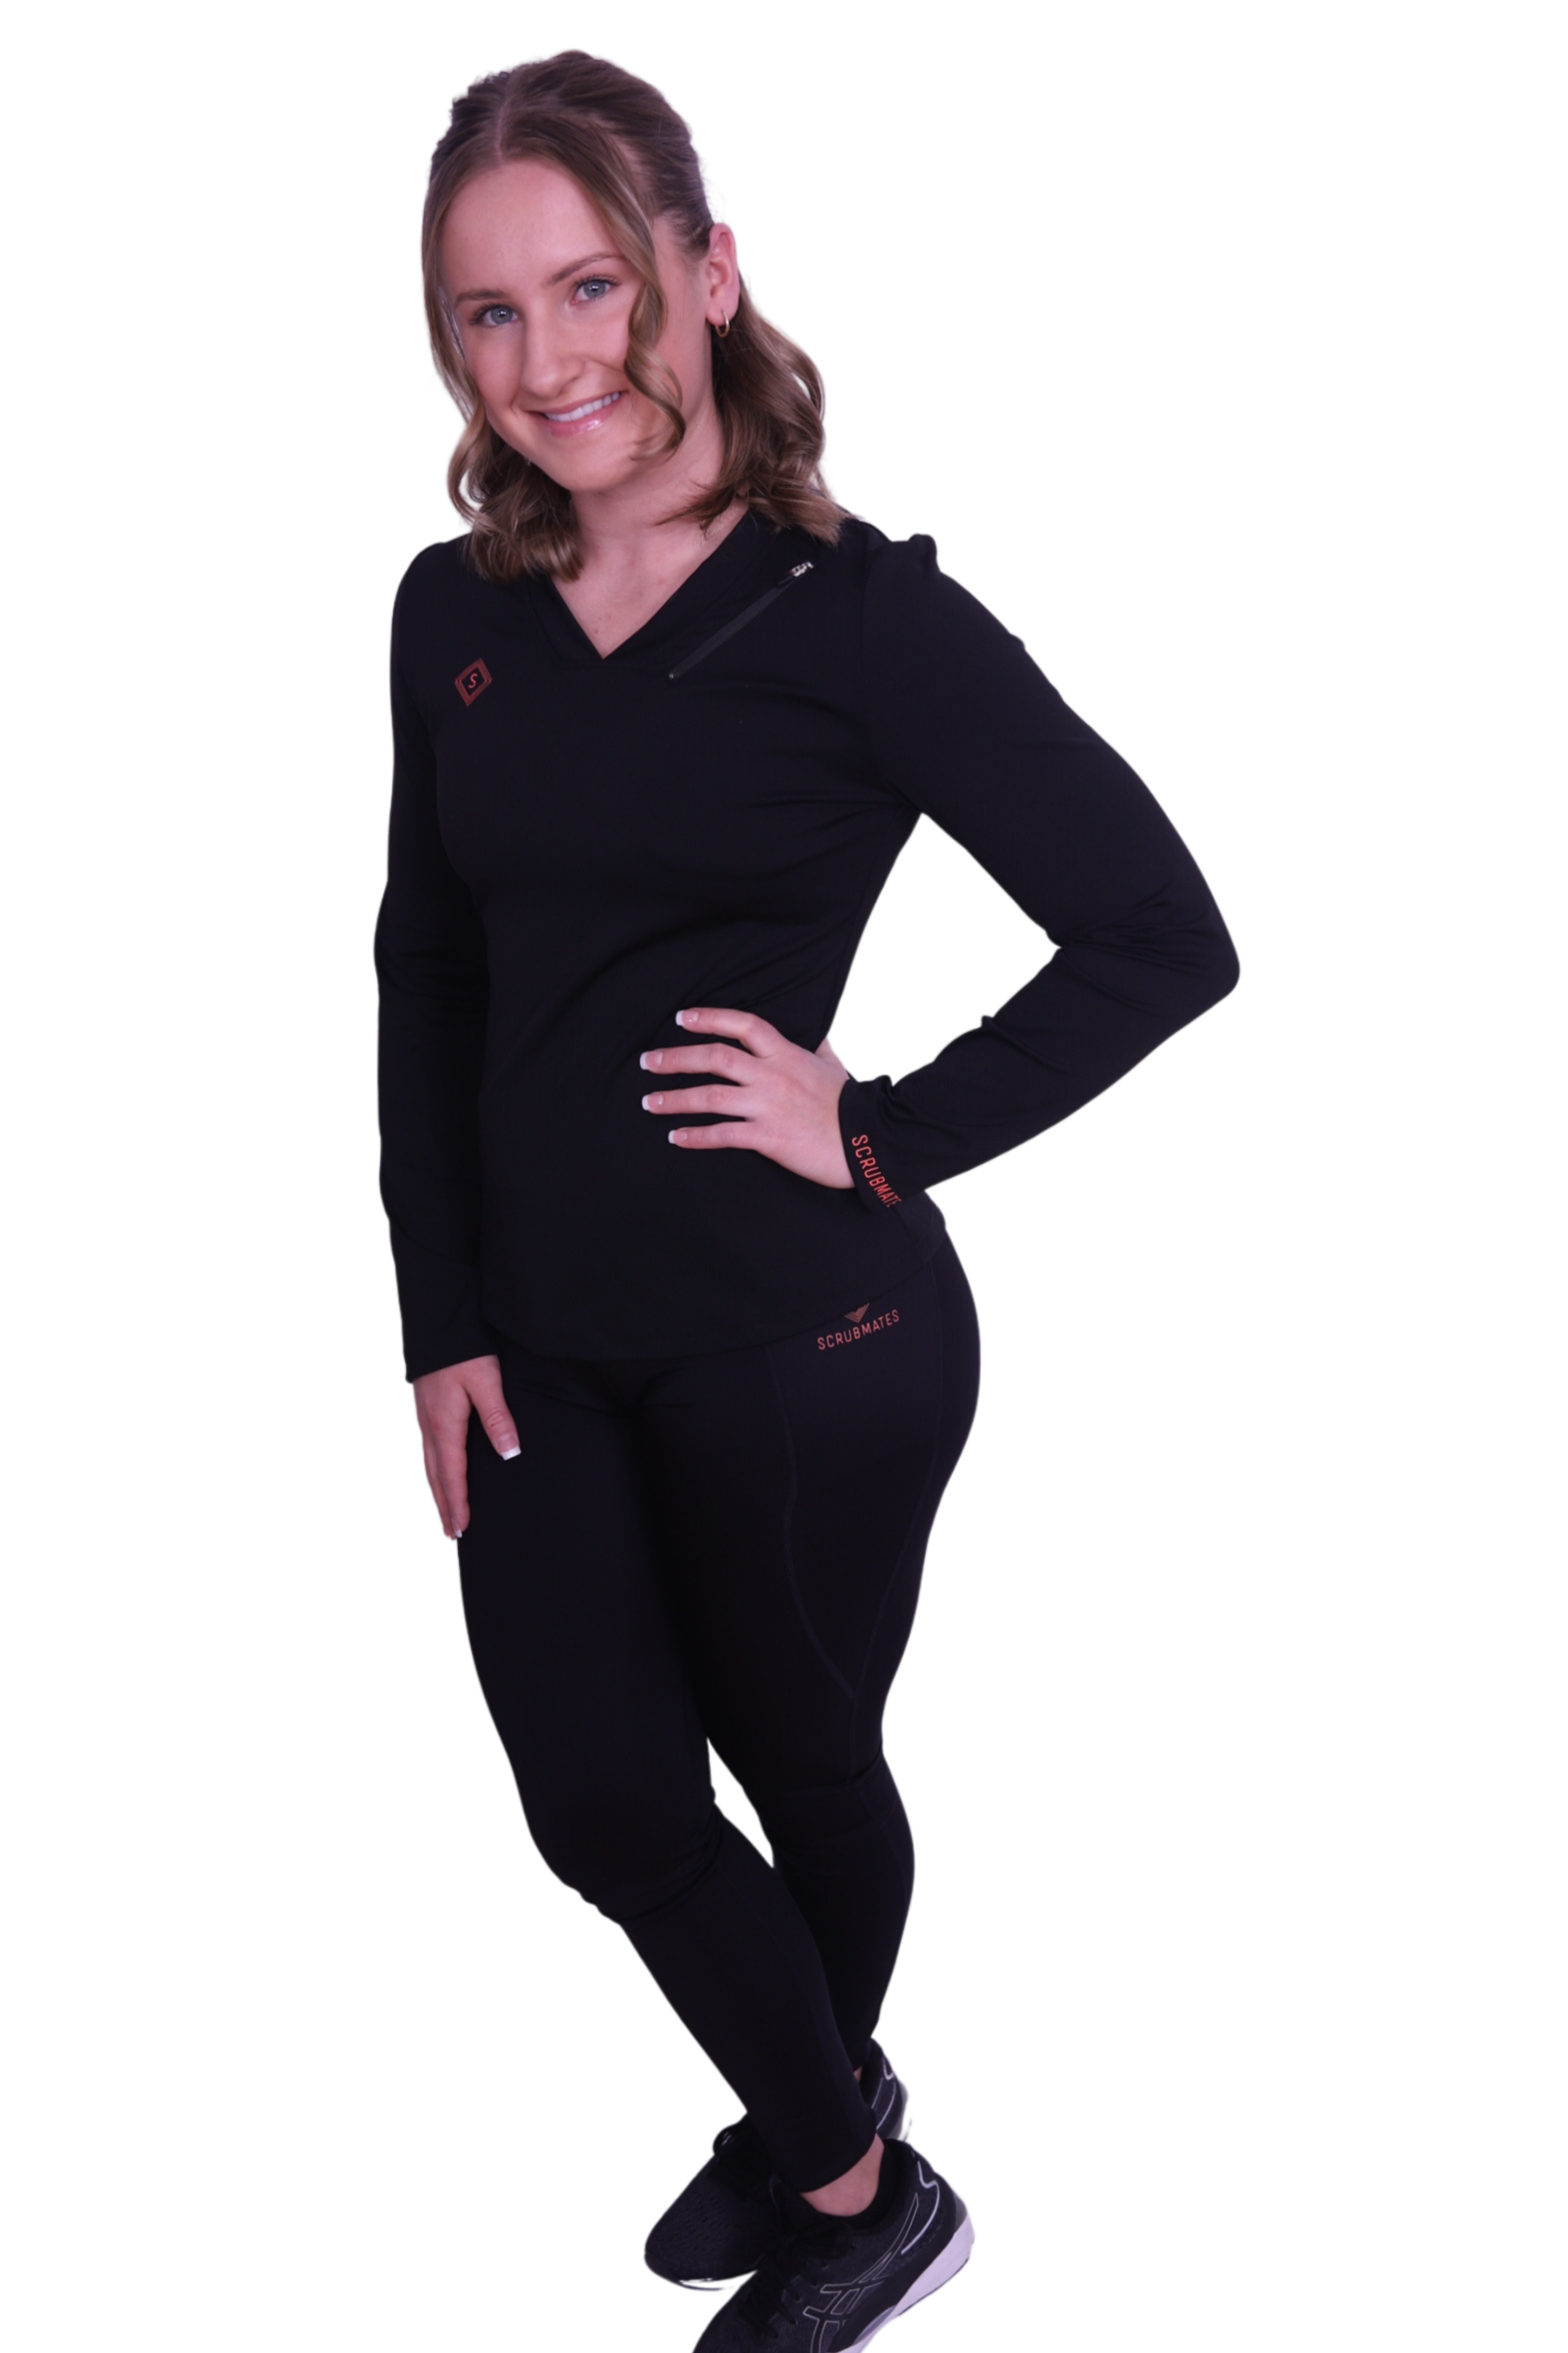 Womens underscrub legging wear leggings under scrubs best womens under scrub leggings women’s performance underscrub leggings black can be worn on shift under scrubs under scrubs leggings with pockets static free high waisted compression pants wearing clothes under scrubs in the OR Under scrubs for the operating room underscrubs for women best underscrubs for nurses under scrubs leggings base layer in the operating room or other cold environments or can be worn alone!